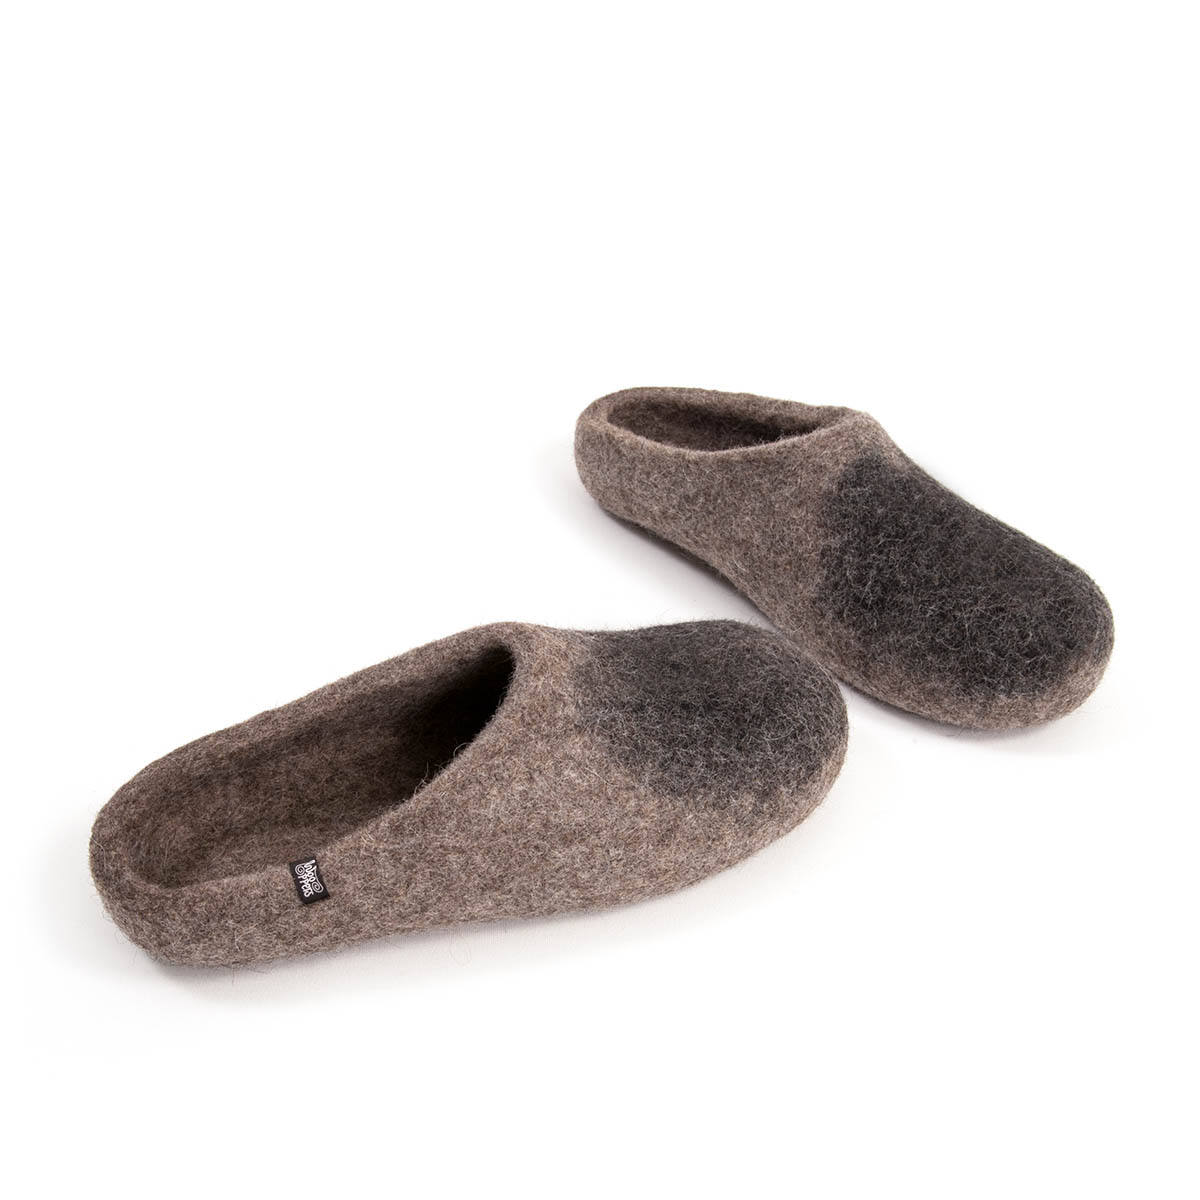 House mules for women in natural gray and black by Wooppers